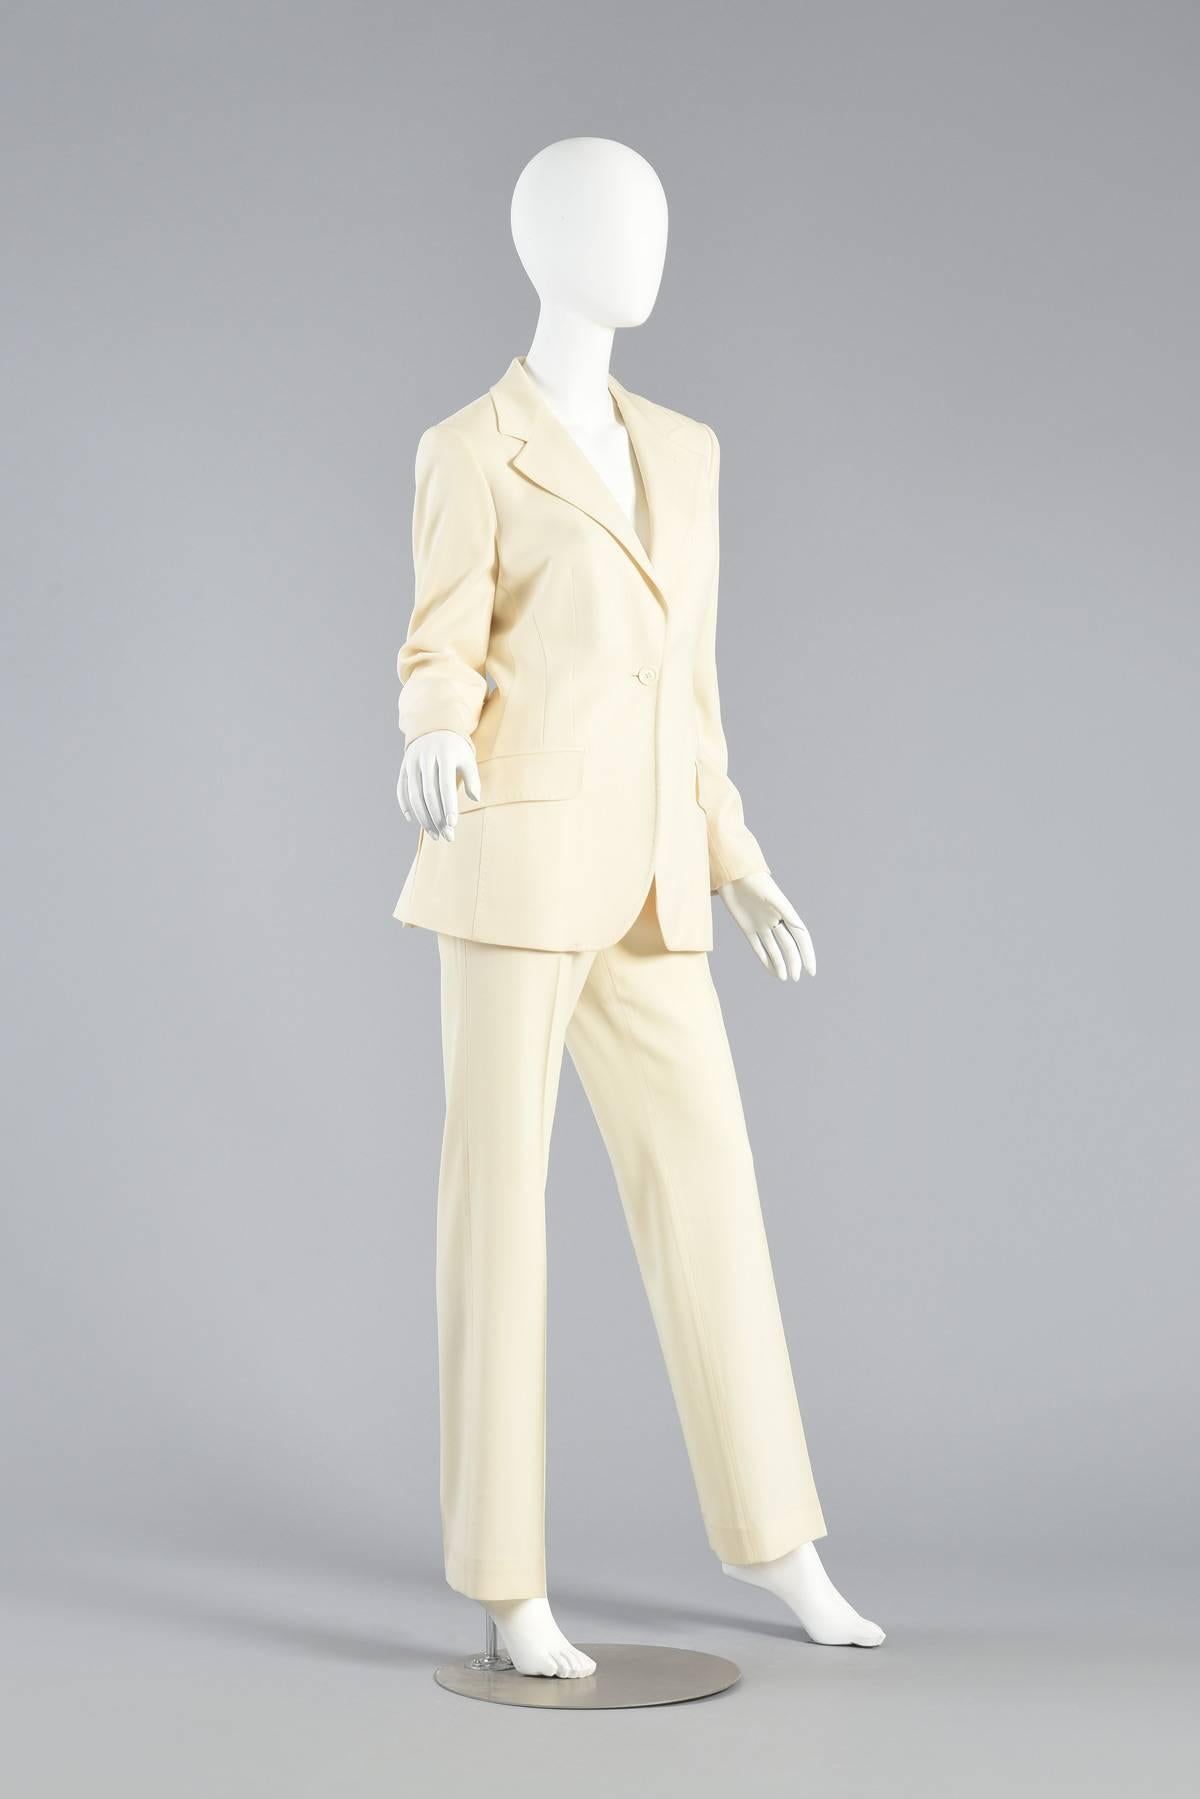 Dolce & Gabbana Ivory Tuxedo Suit For Sale 1